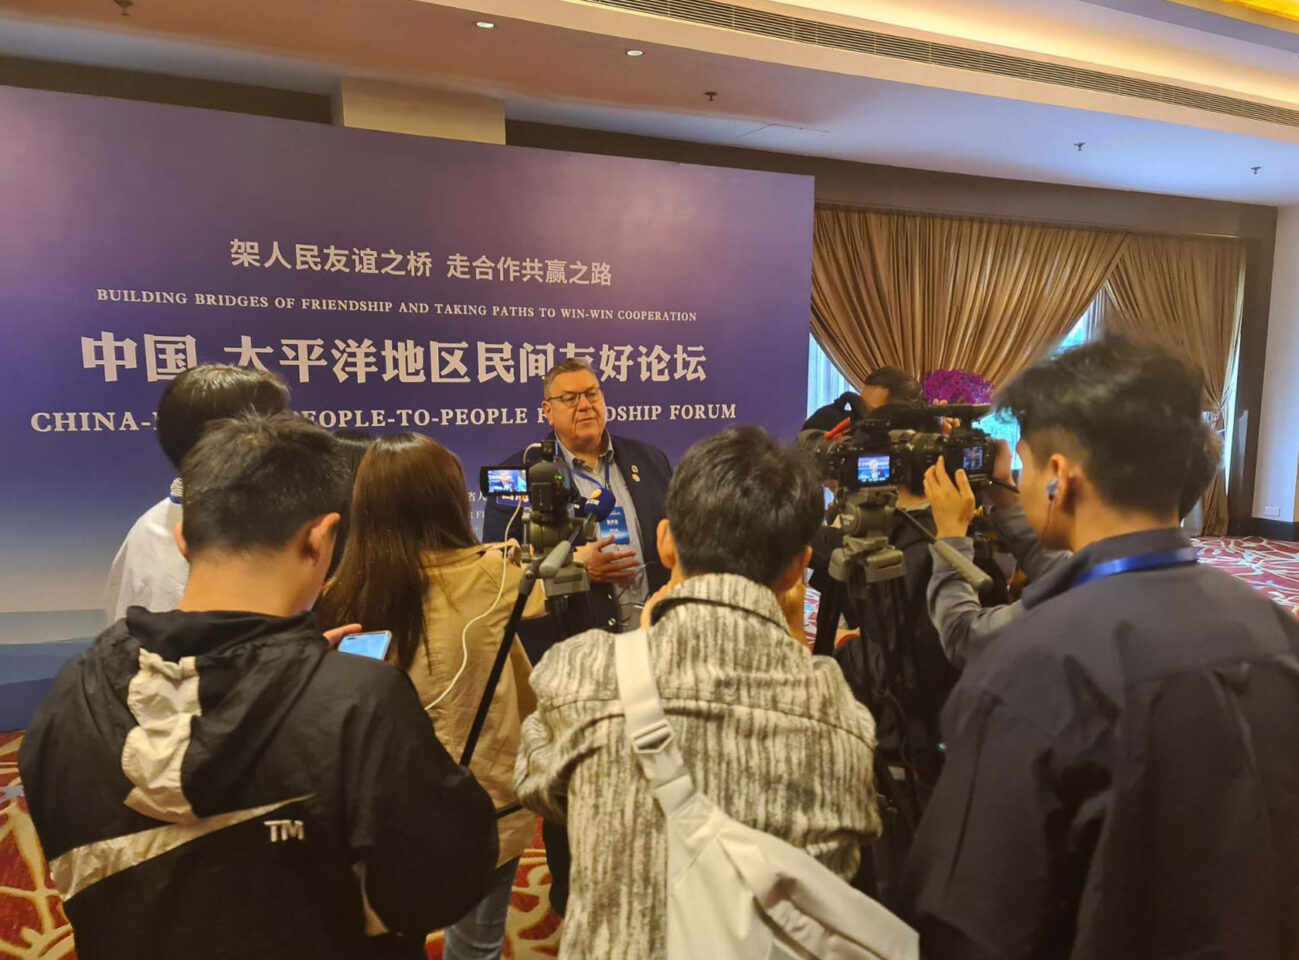 National President of New Zealand China Friendship Society Chris Lipscombe responds to questions from local media following his presentation at the China-Pacific People-to-People Friendship Forum co-organised by PCFA and CPAFFC in Fuzhou, May 2023.